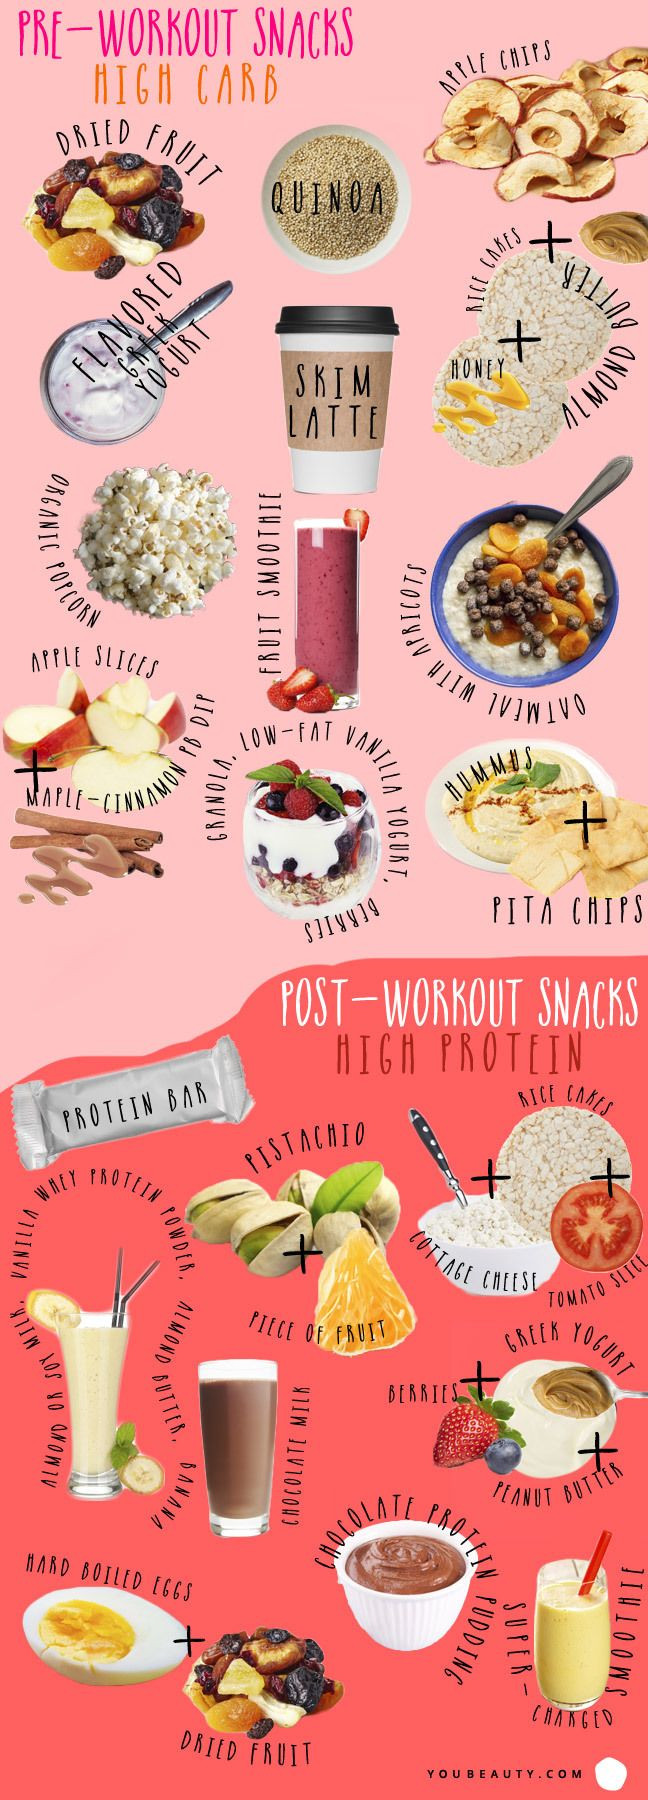 Healthy Snacks Before Workout
 Nutritionist Approved Pre and Post Workout Snacks